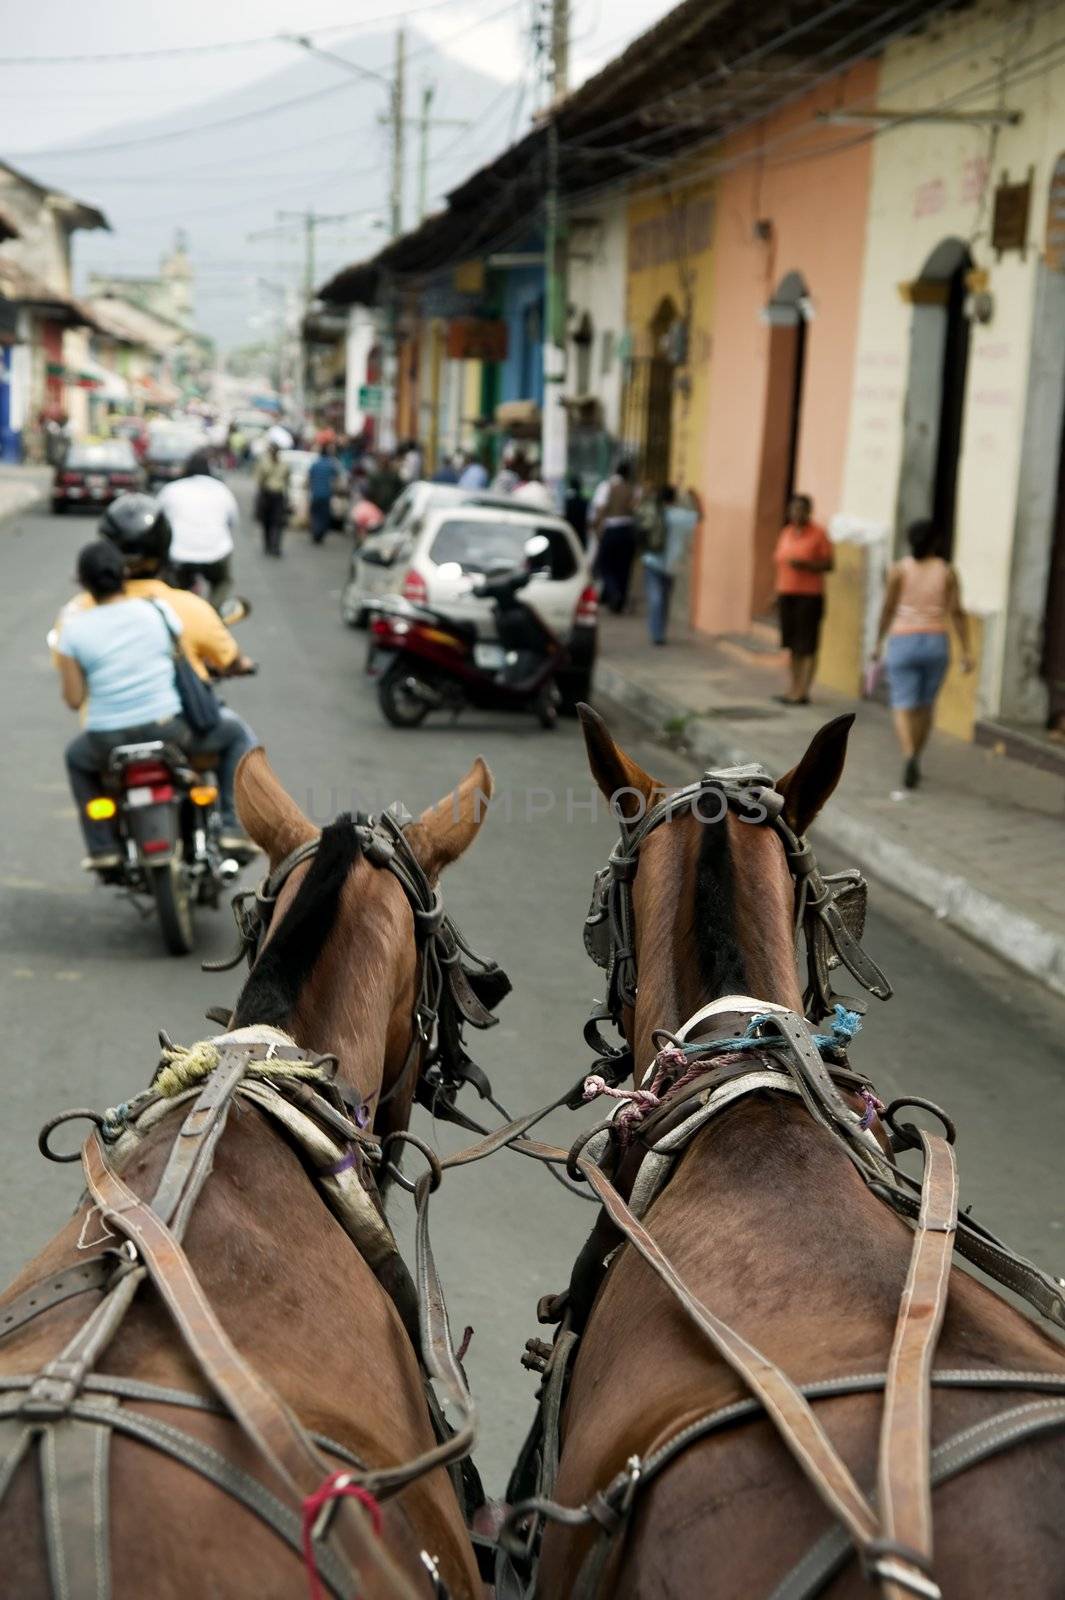 Horses on the street in downtown Granada Nicaragua